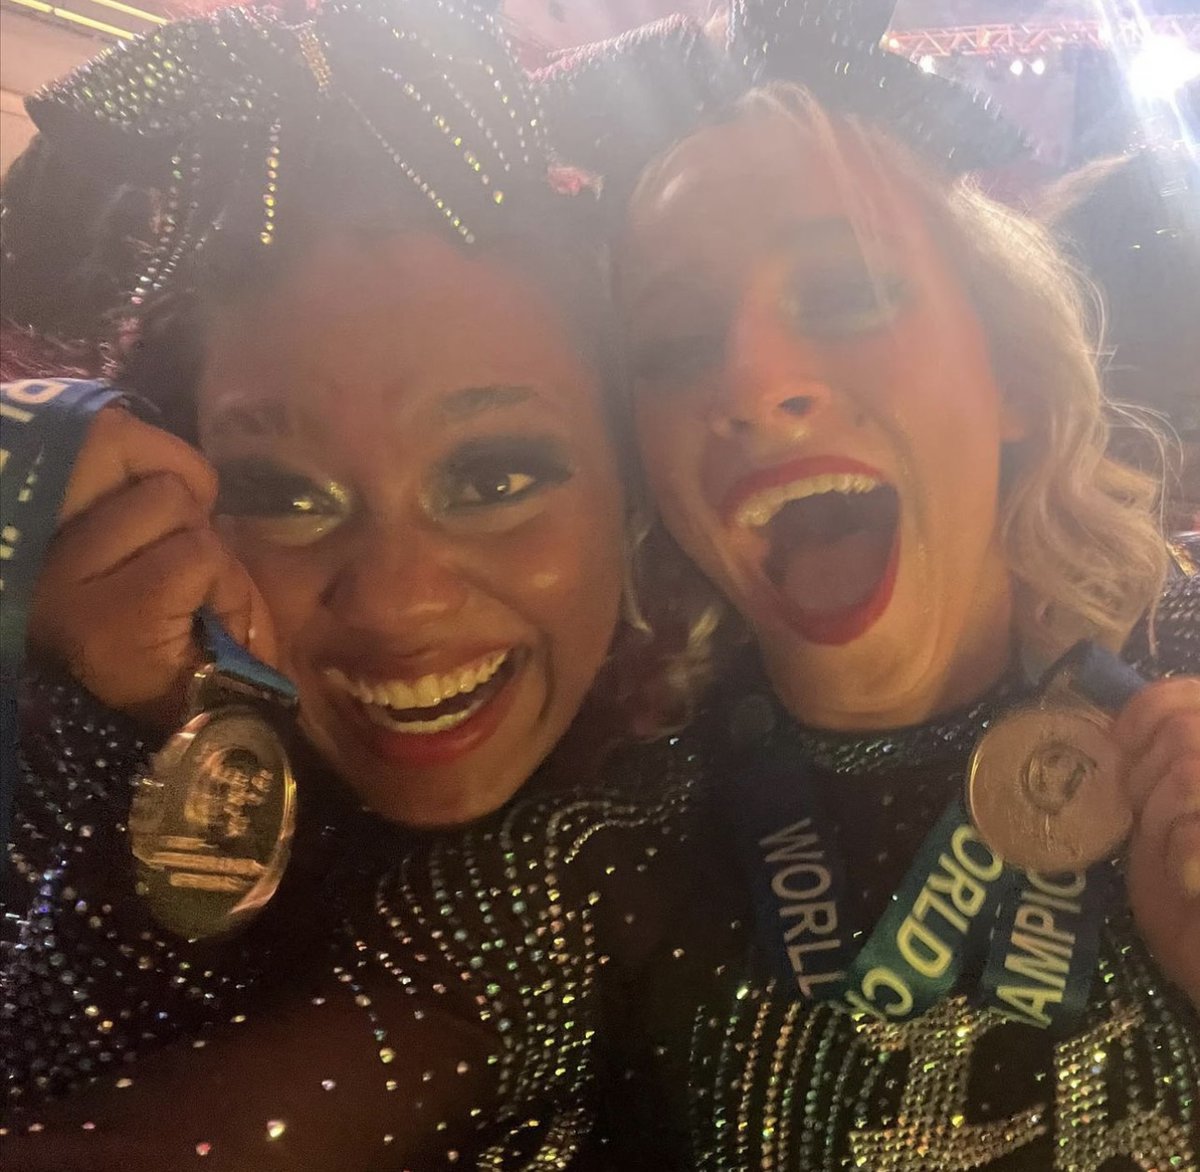 The bling 👉 the moment worthy of legendary custom champ rings. 💍🏆 
-
📷 Lili Wyre | @mdtwistersf5 @themdtwisters @DBSchamprings  #HerffJones #HJChamp #ChampionHasARingToIt #HJChampRing #DesignsBySantwon #DBSchamprings #Champion #WorldsChampion #CheerChampions